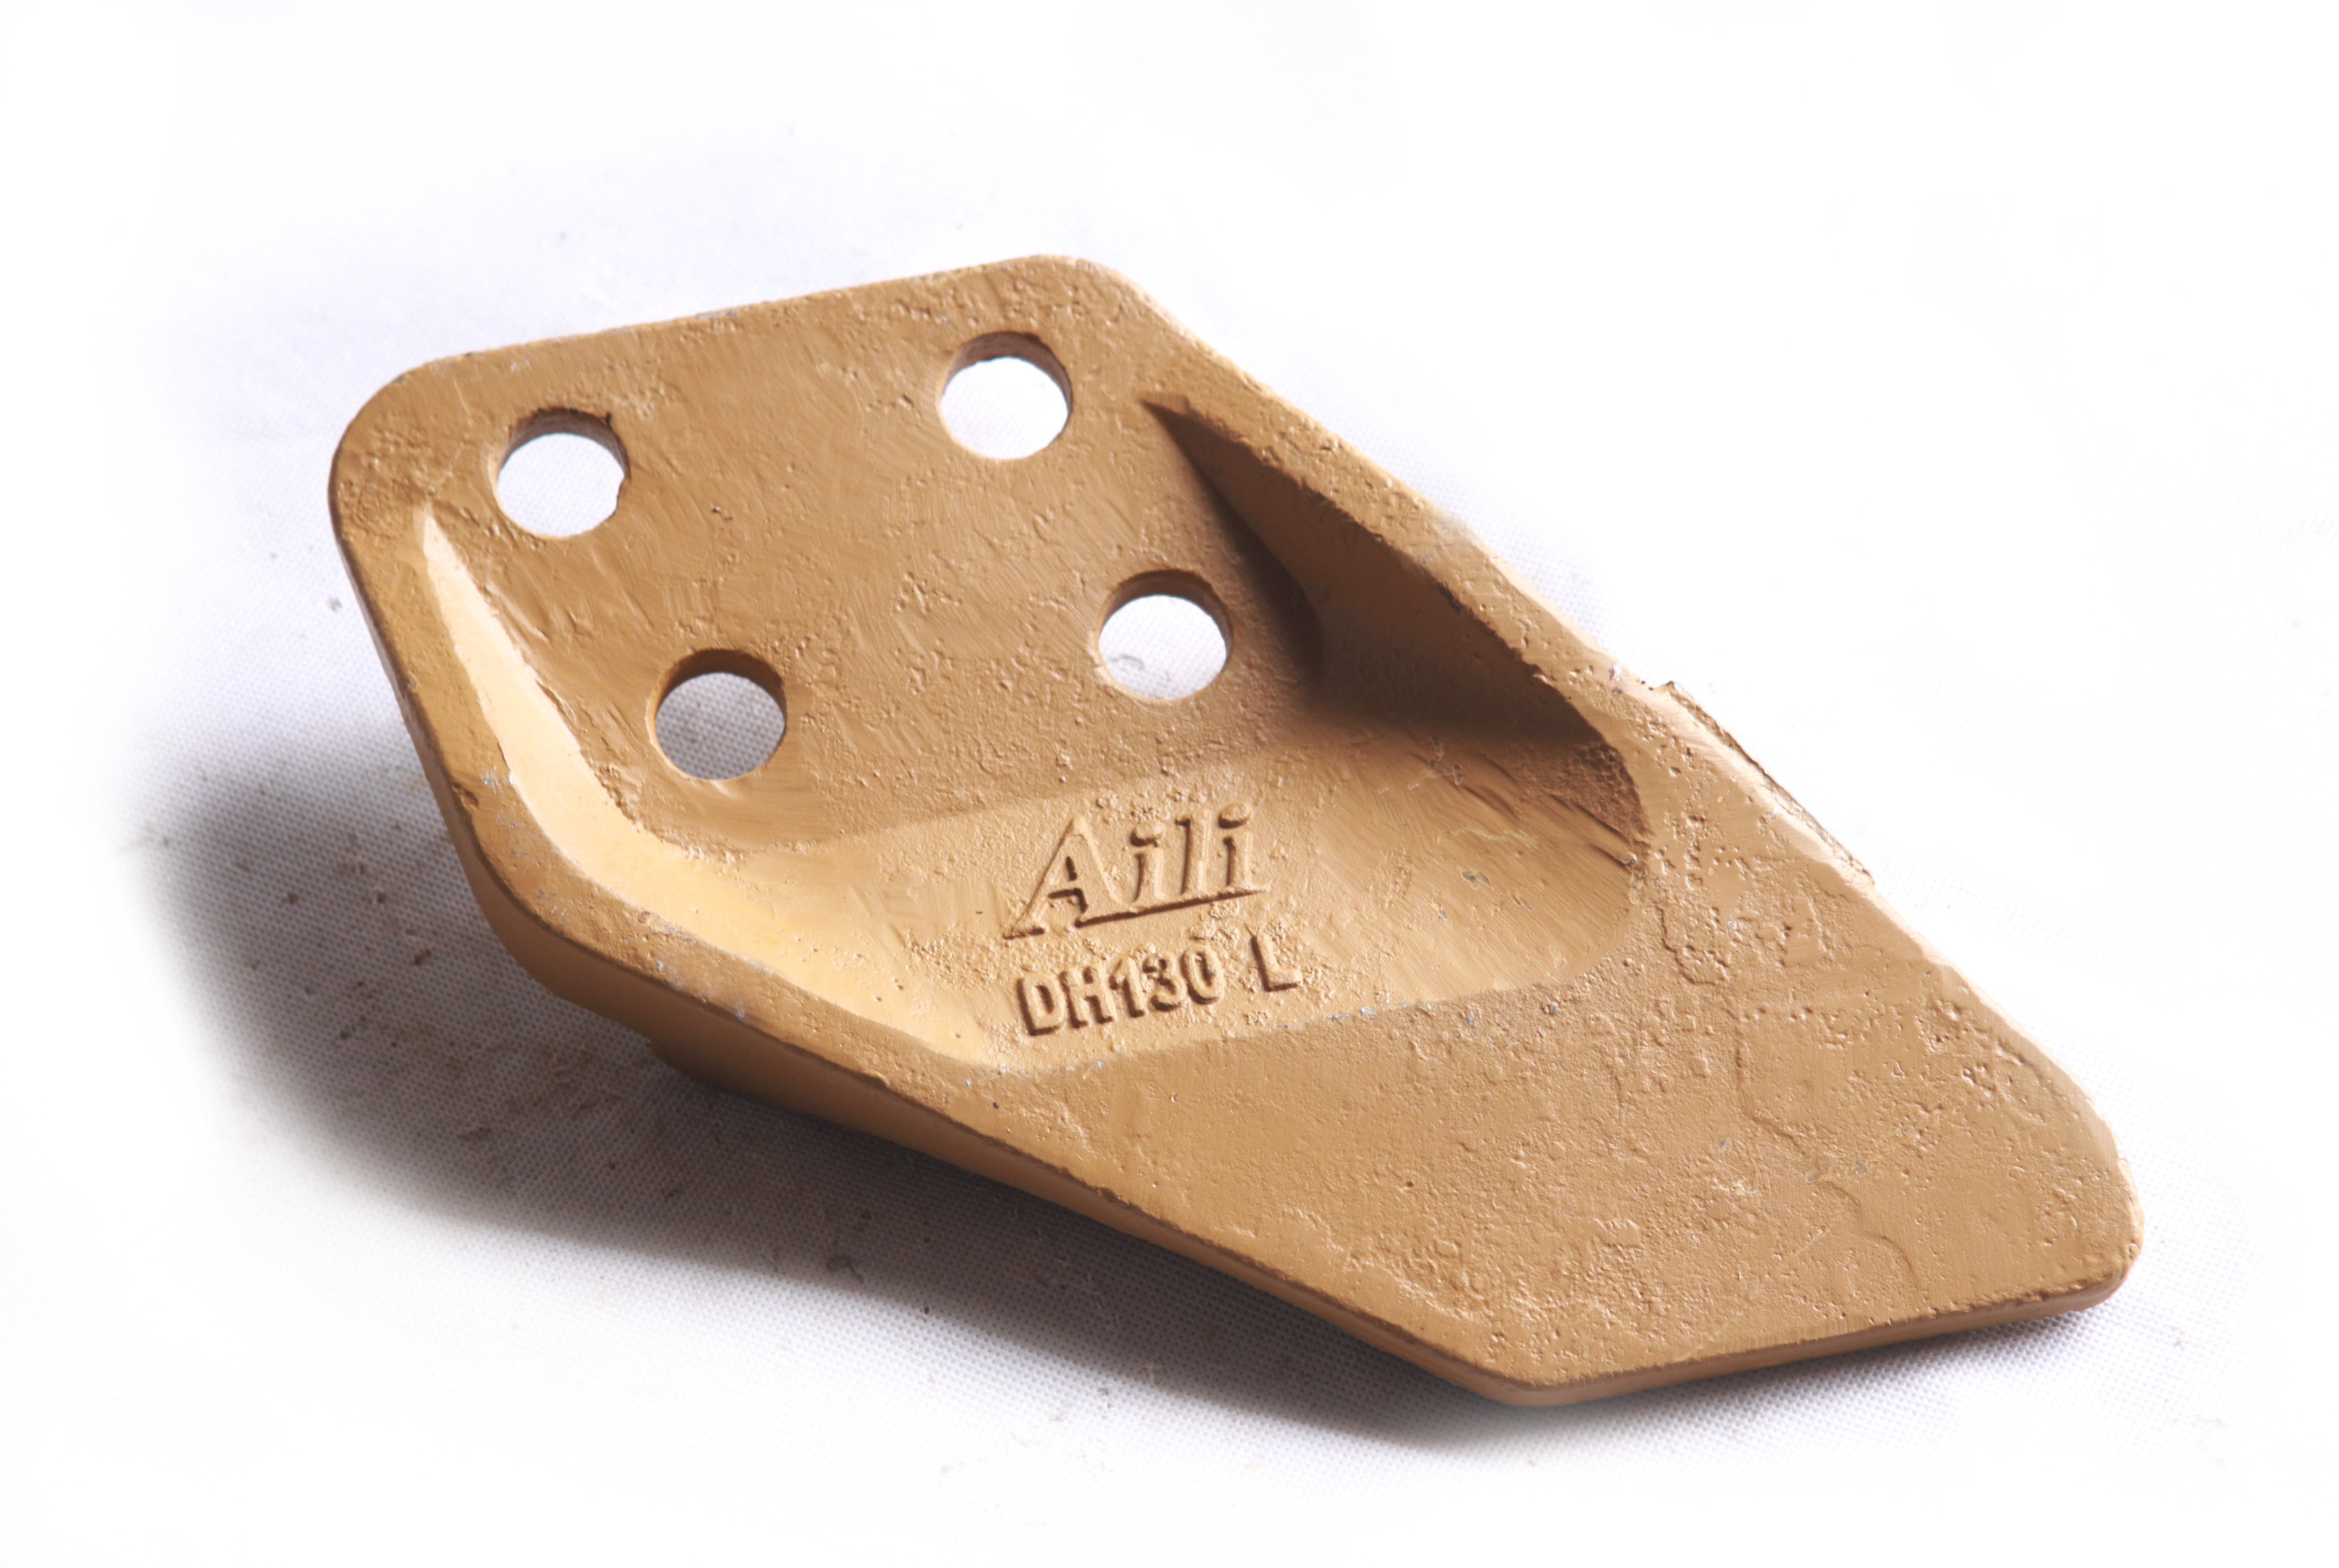 Deawoo 2713-1228, 2713-1229 DH130 4-hole Excavator Side Cutters  Form Aili Casting With High Quality